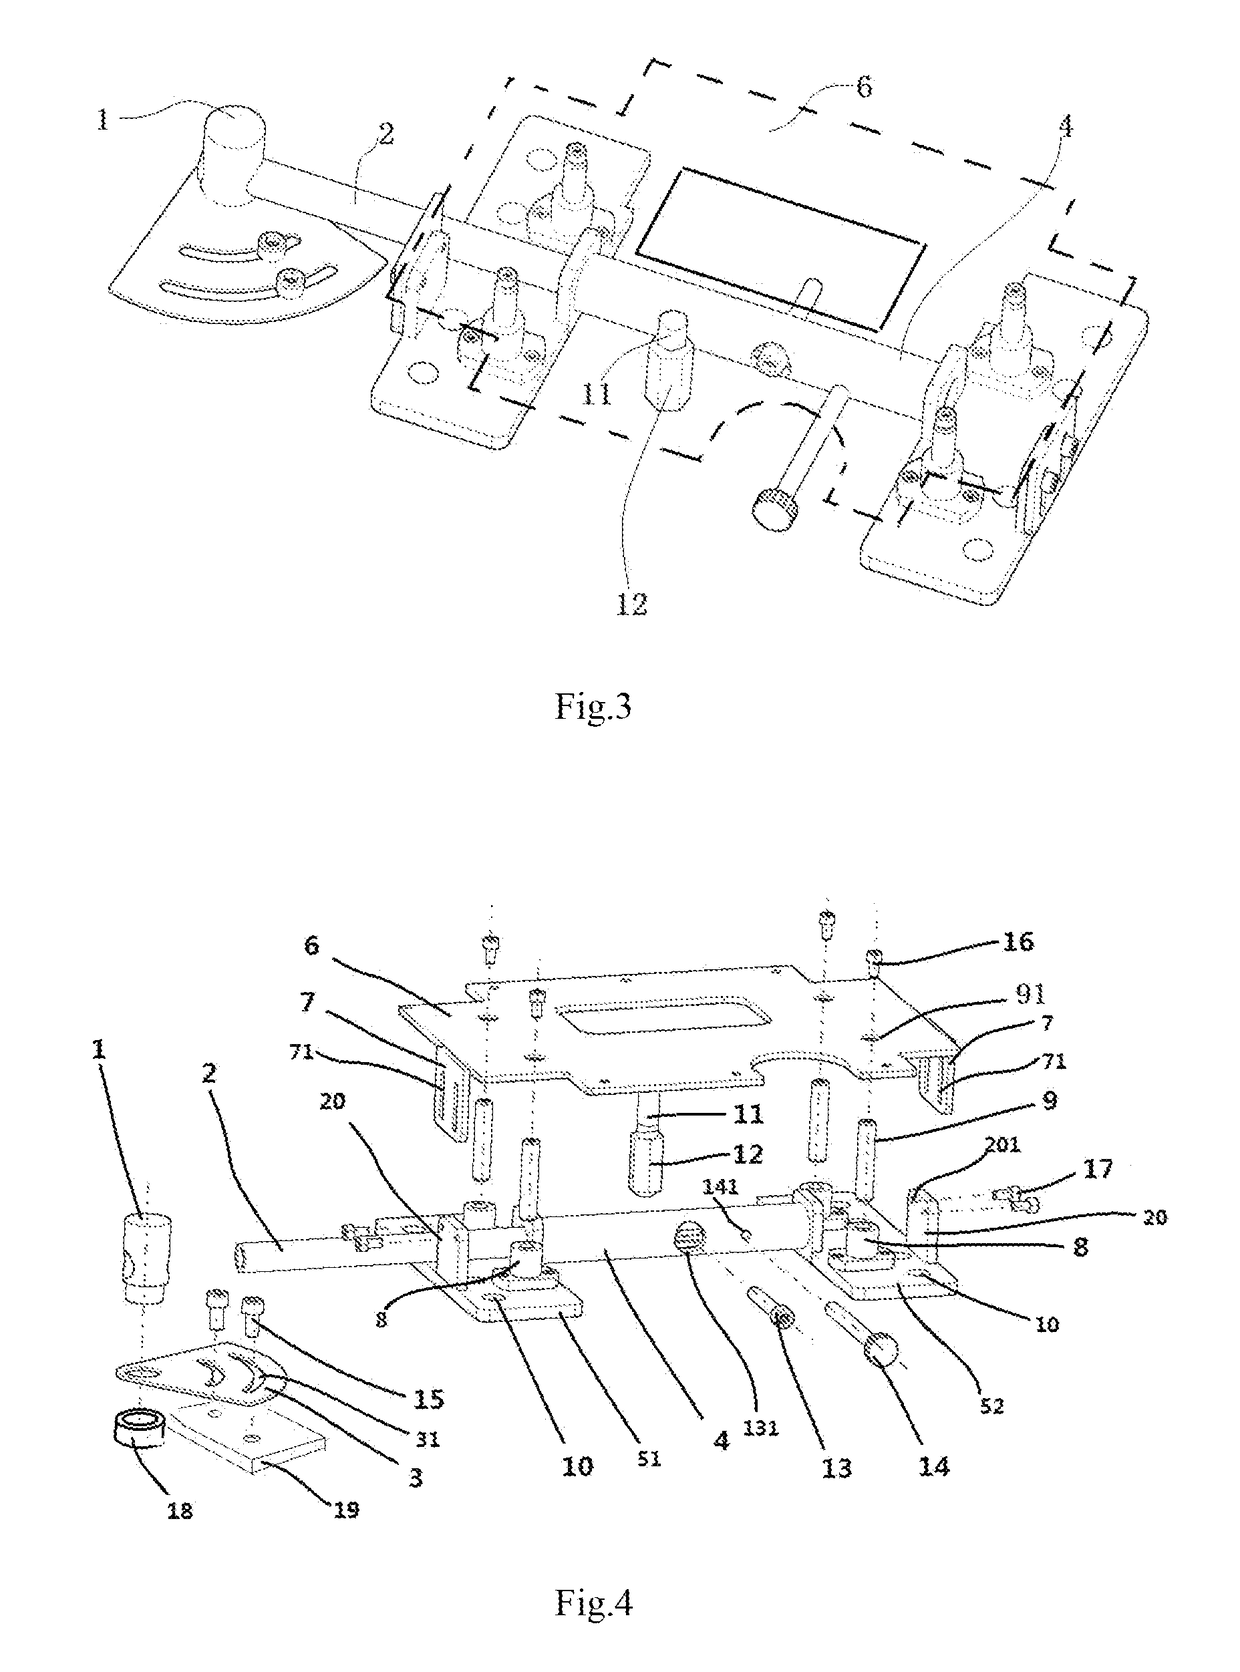 Positioning device for horizontal external ignition apparatus